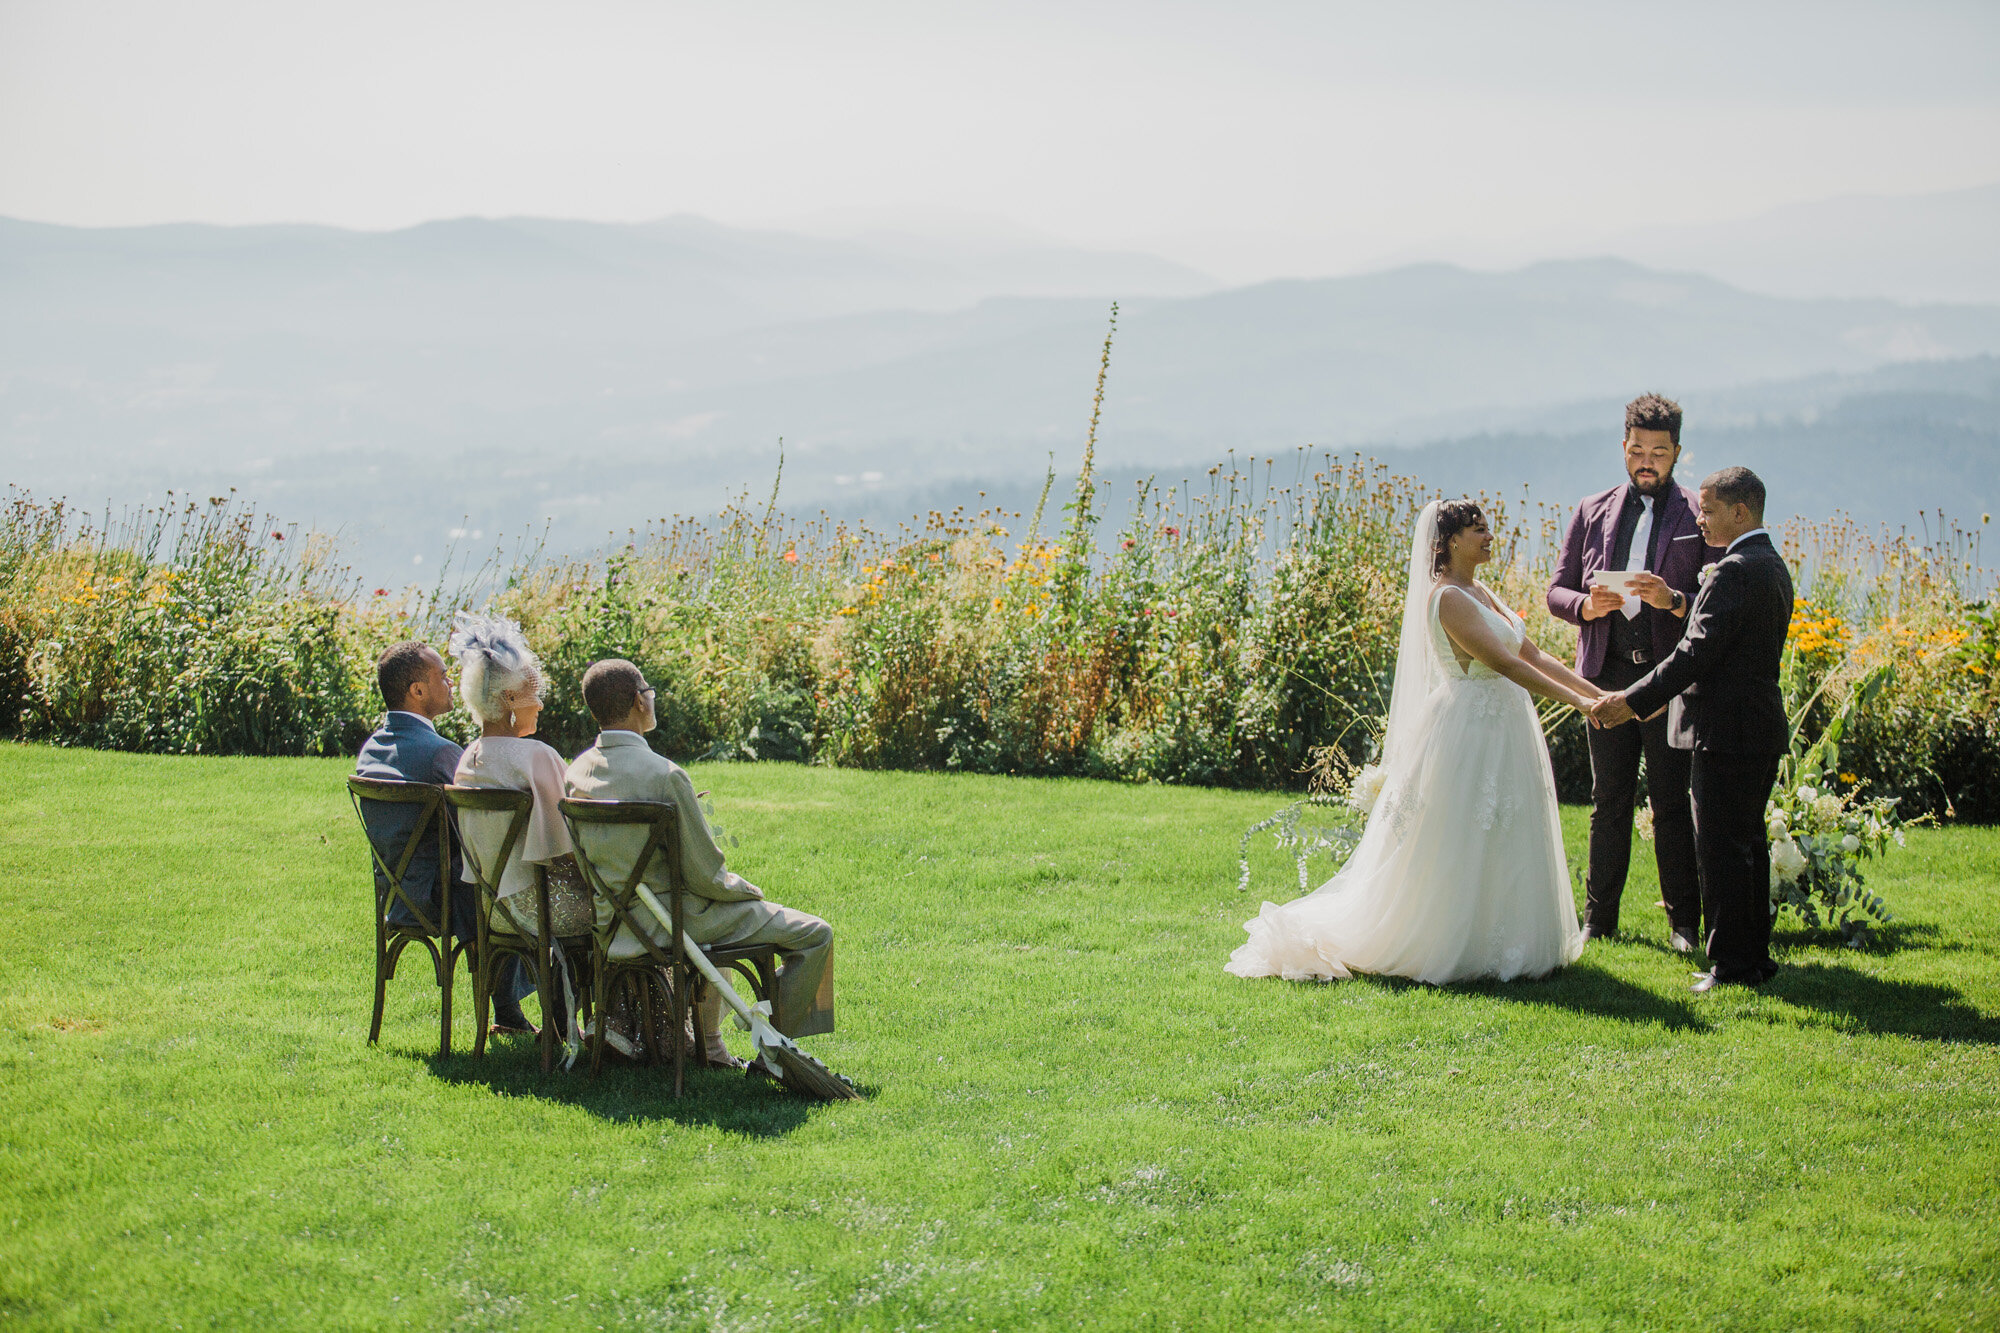 Gorge-Crest-Vineyards-Wedding-Venue-Outlive-Creative-luxe-event-productions_72.jpg